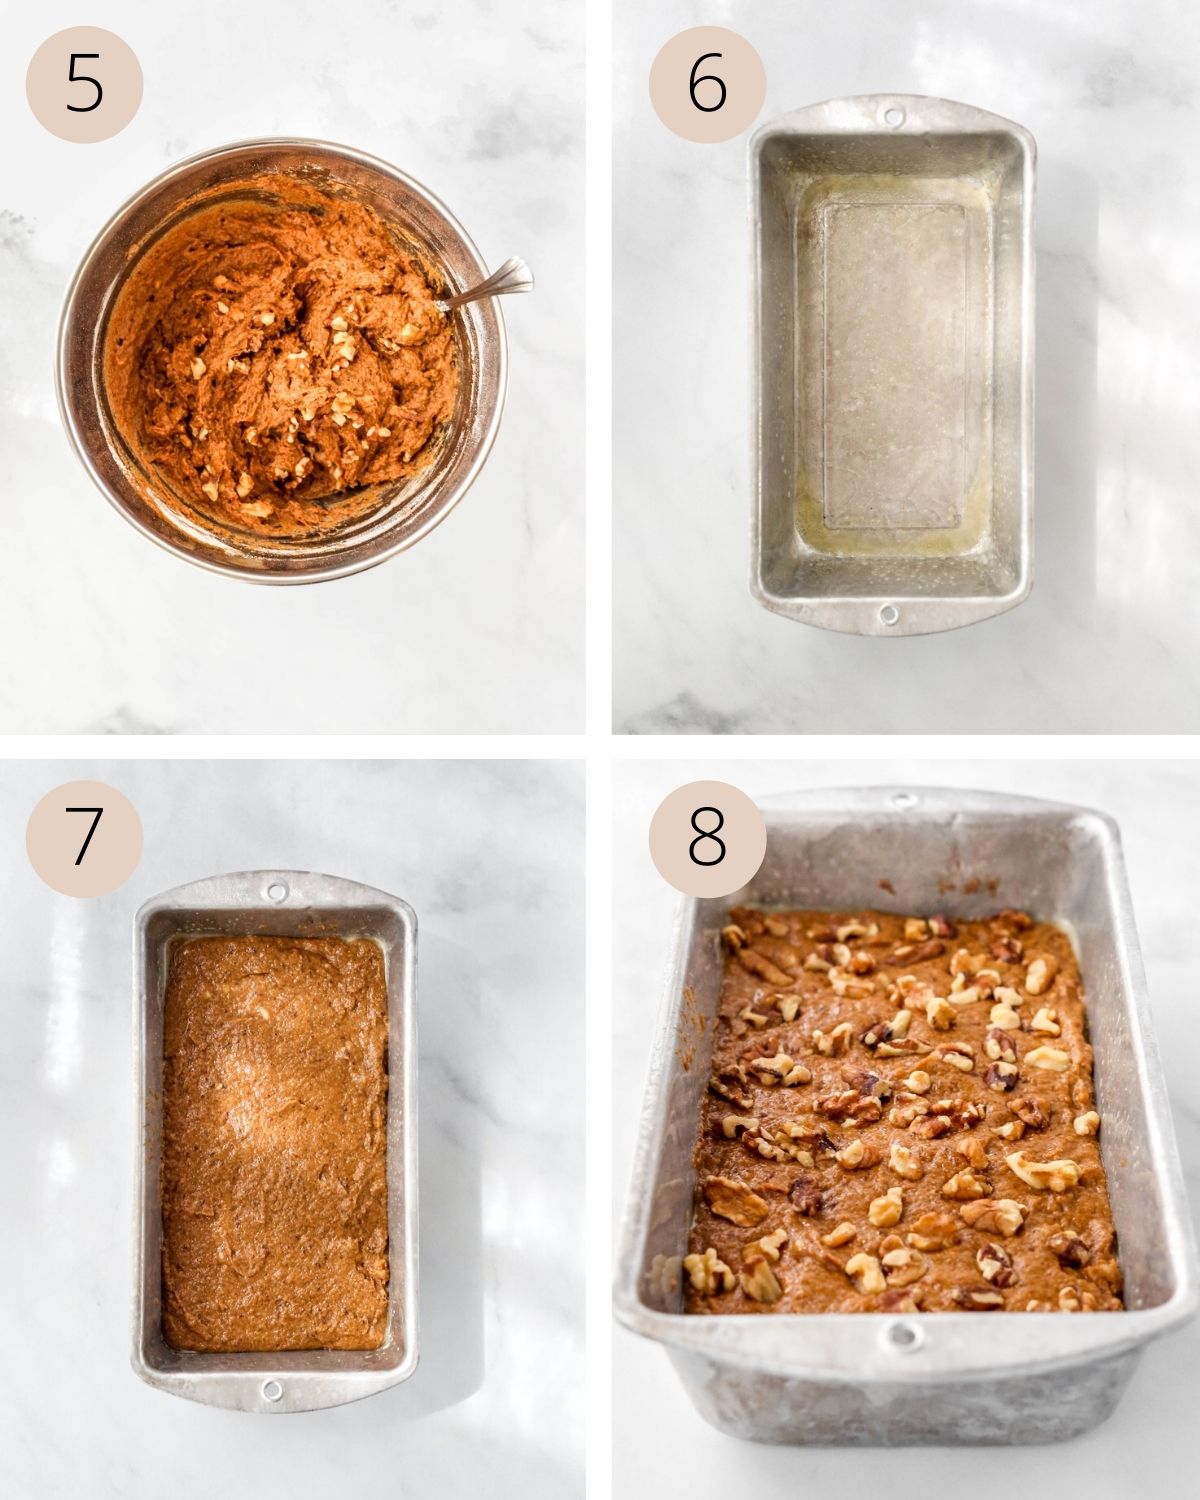 a collage of four images showing how to mix in the walnuts, add the batter to the loaf pan, and add more walnuts on top before baking.